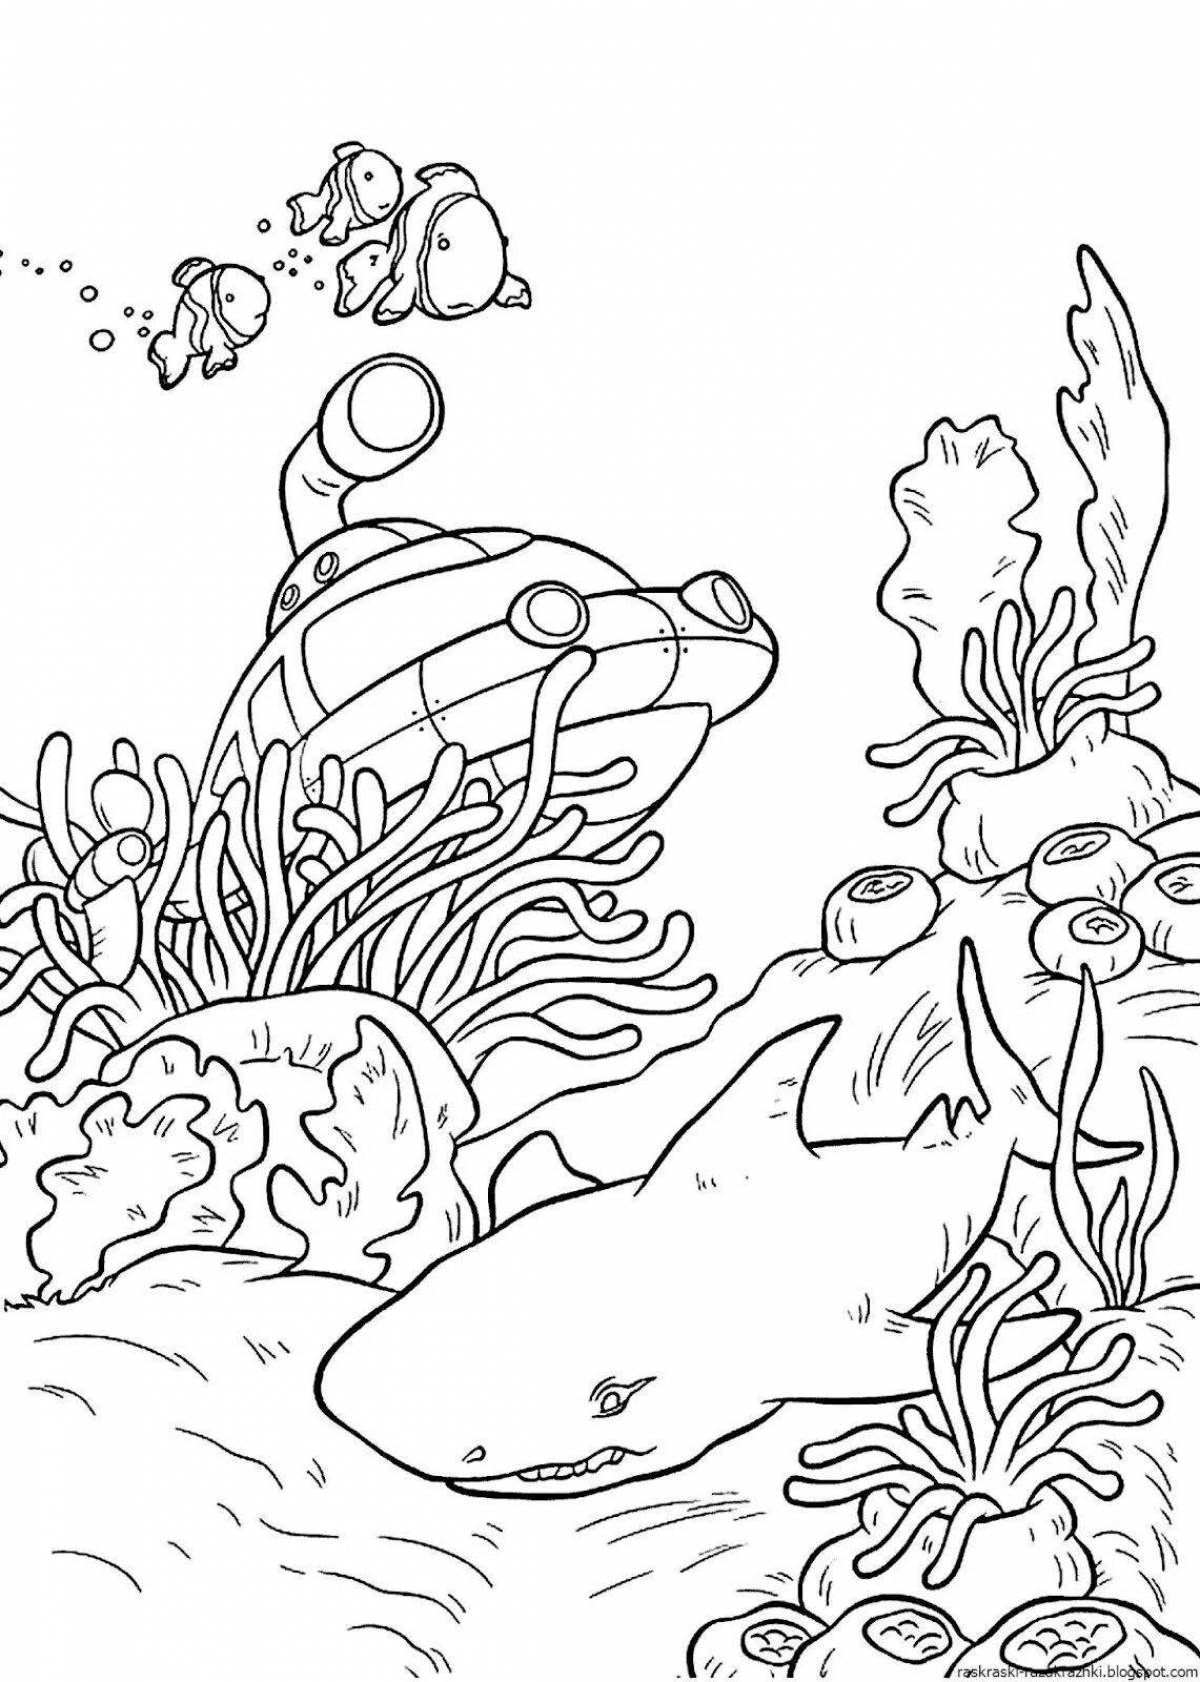 Colored water children's world coloring book